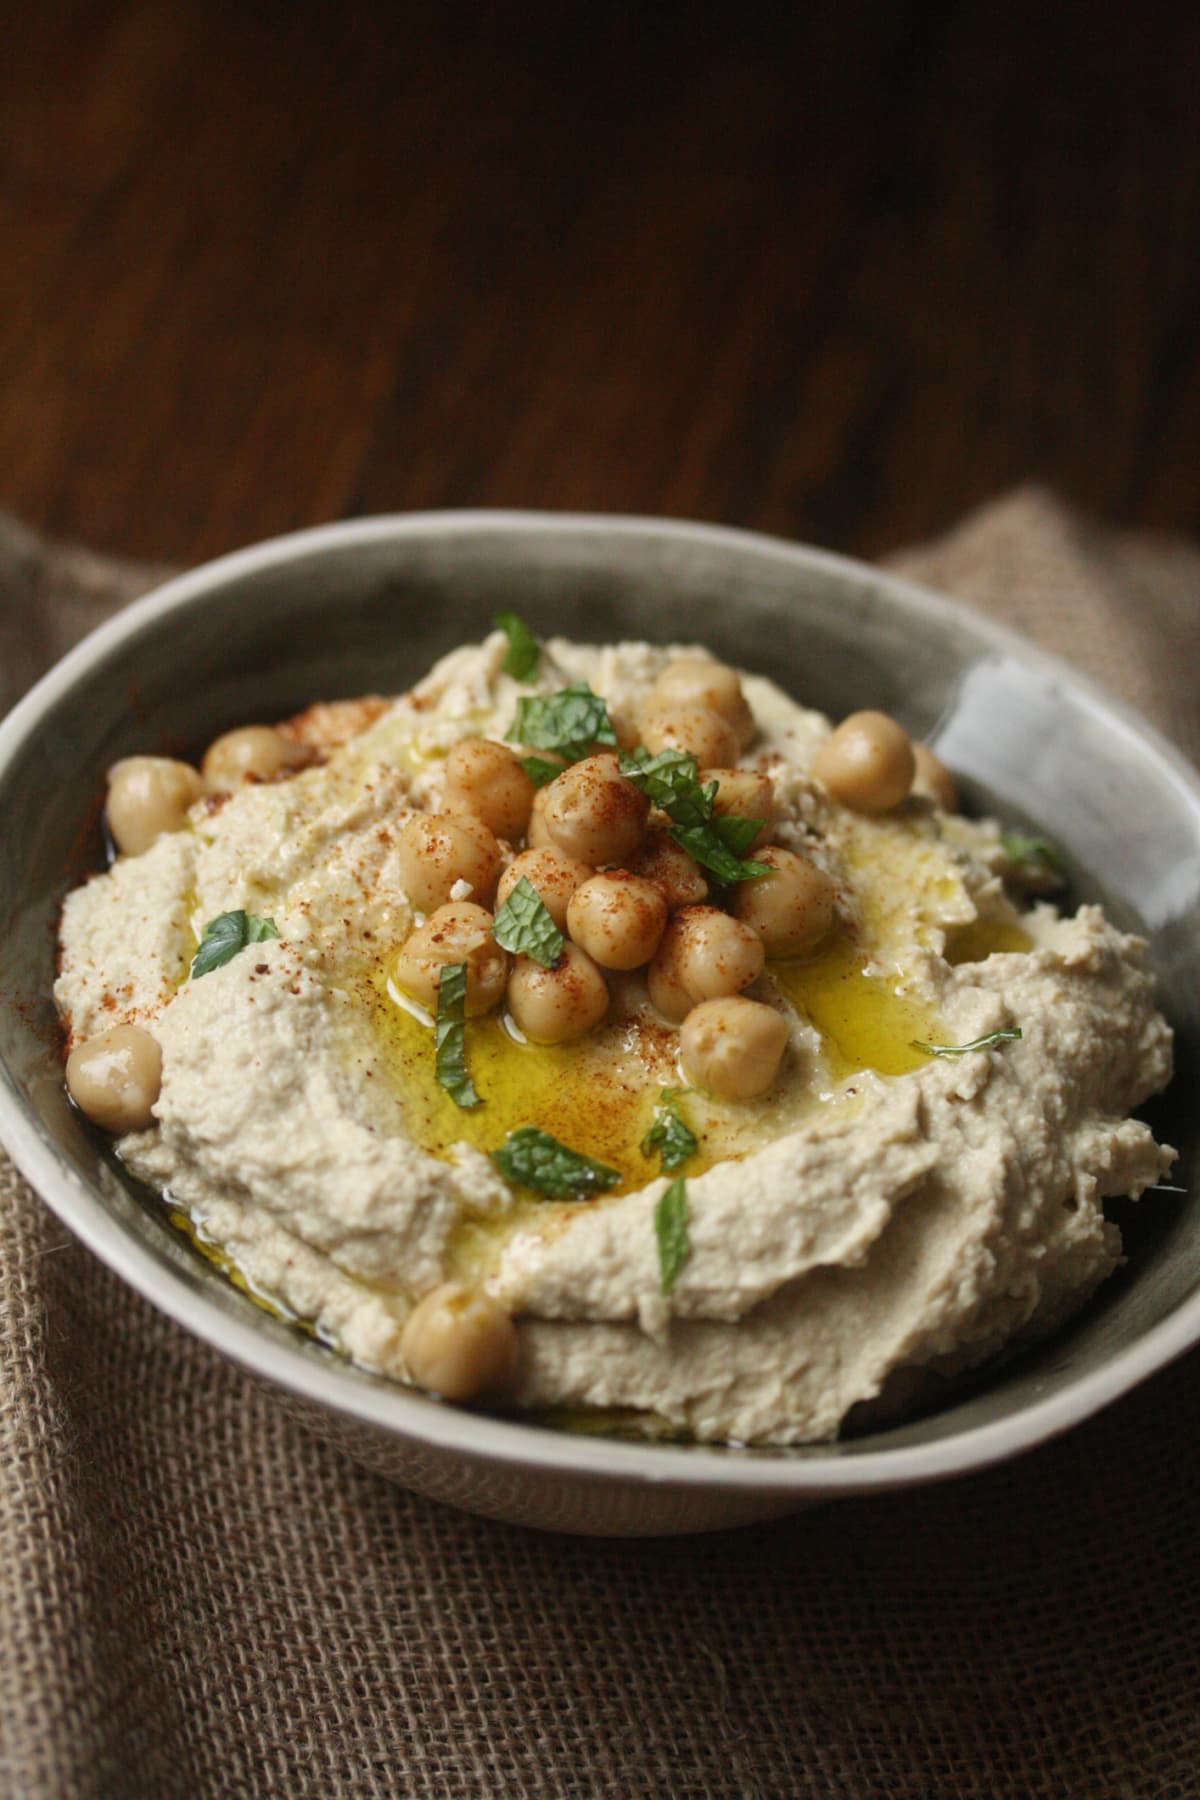 Traditional homemade chickpea hummus with olive oil and spices